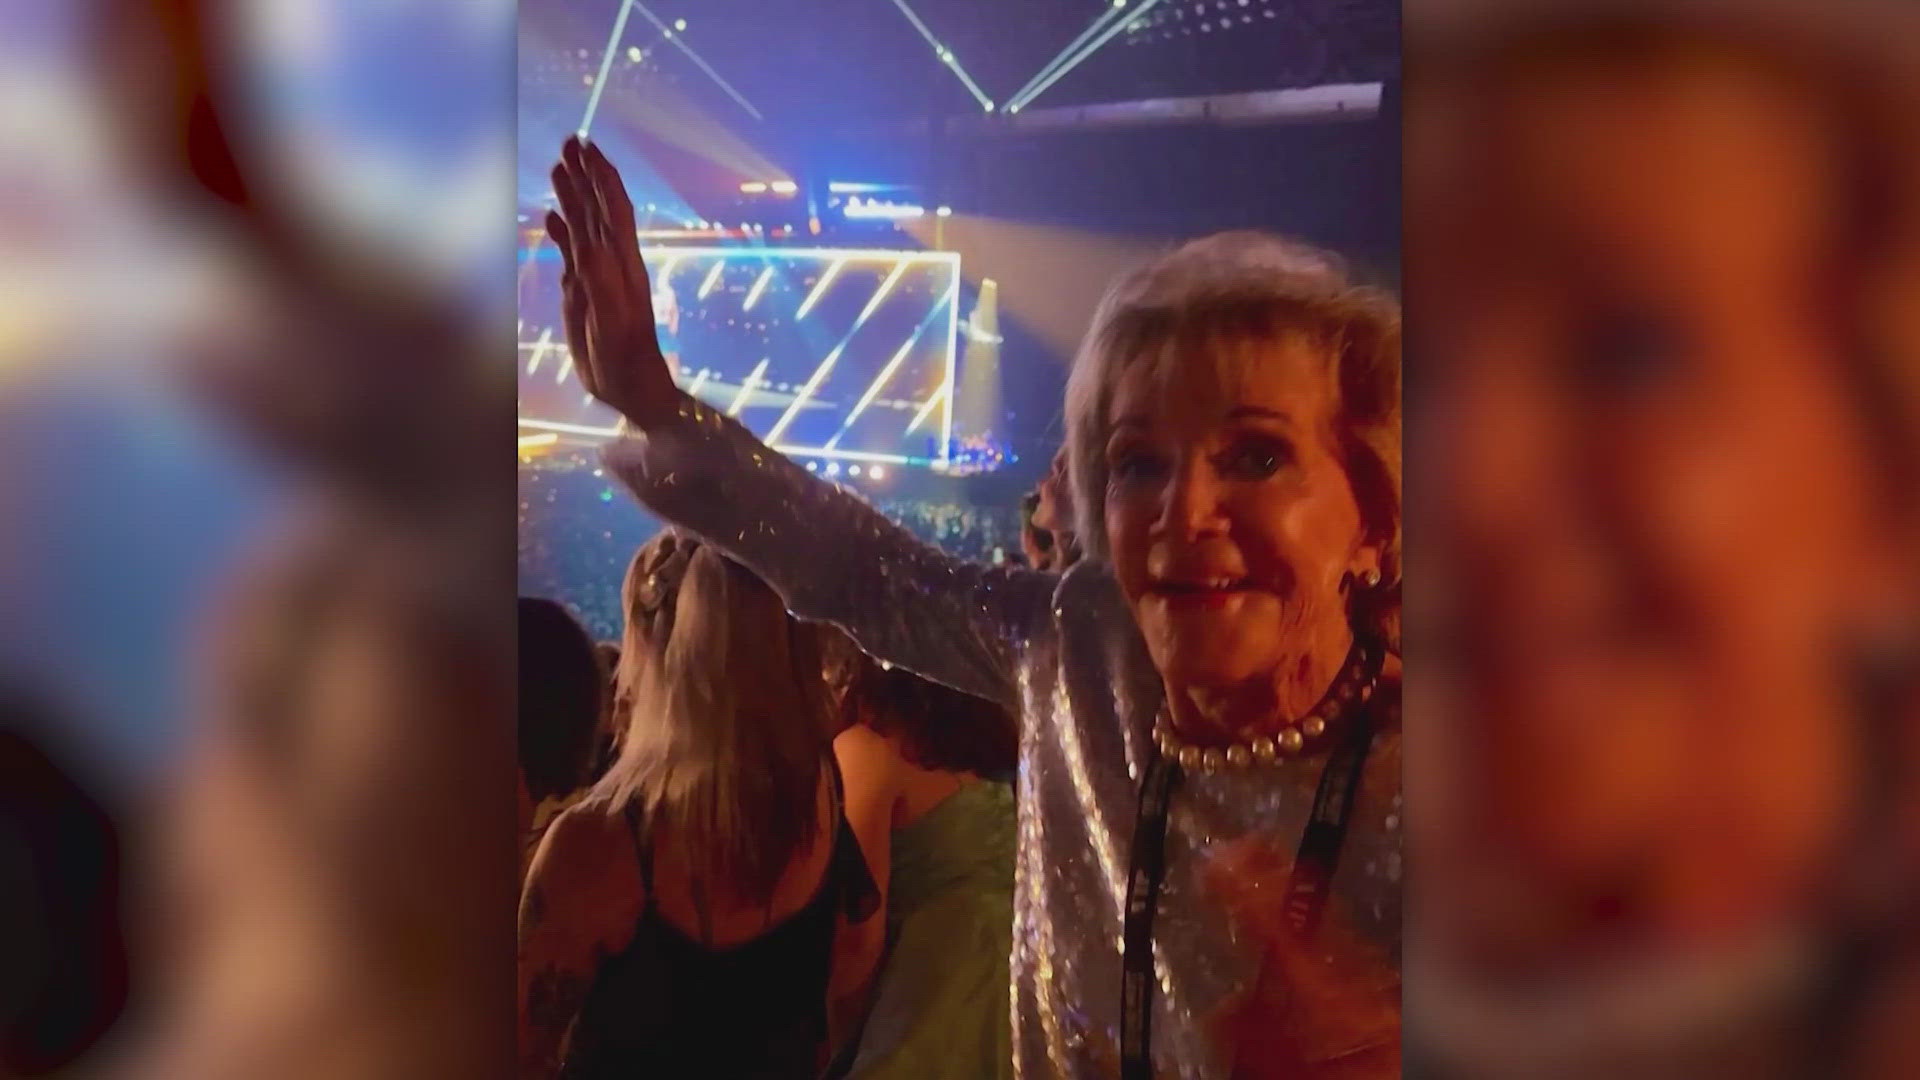 Nancy Strong, who still owns and runs a Dallas-based travel agency, wrote about her experience attending the concert on Instagram.